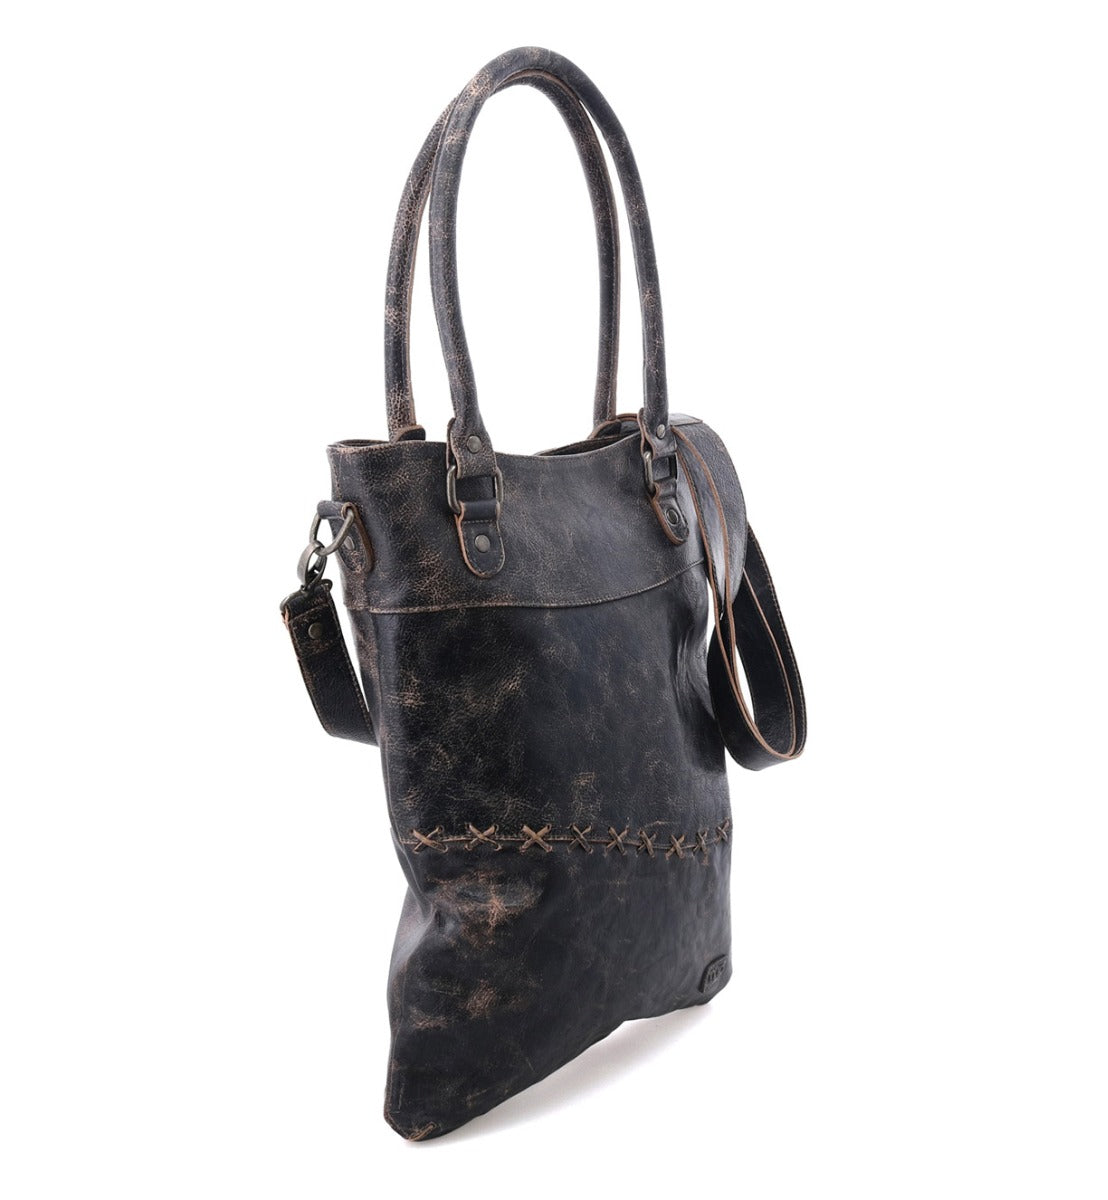 A black leather Celta tote bag with a strap from Bed Stu.